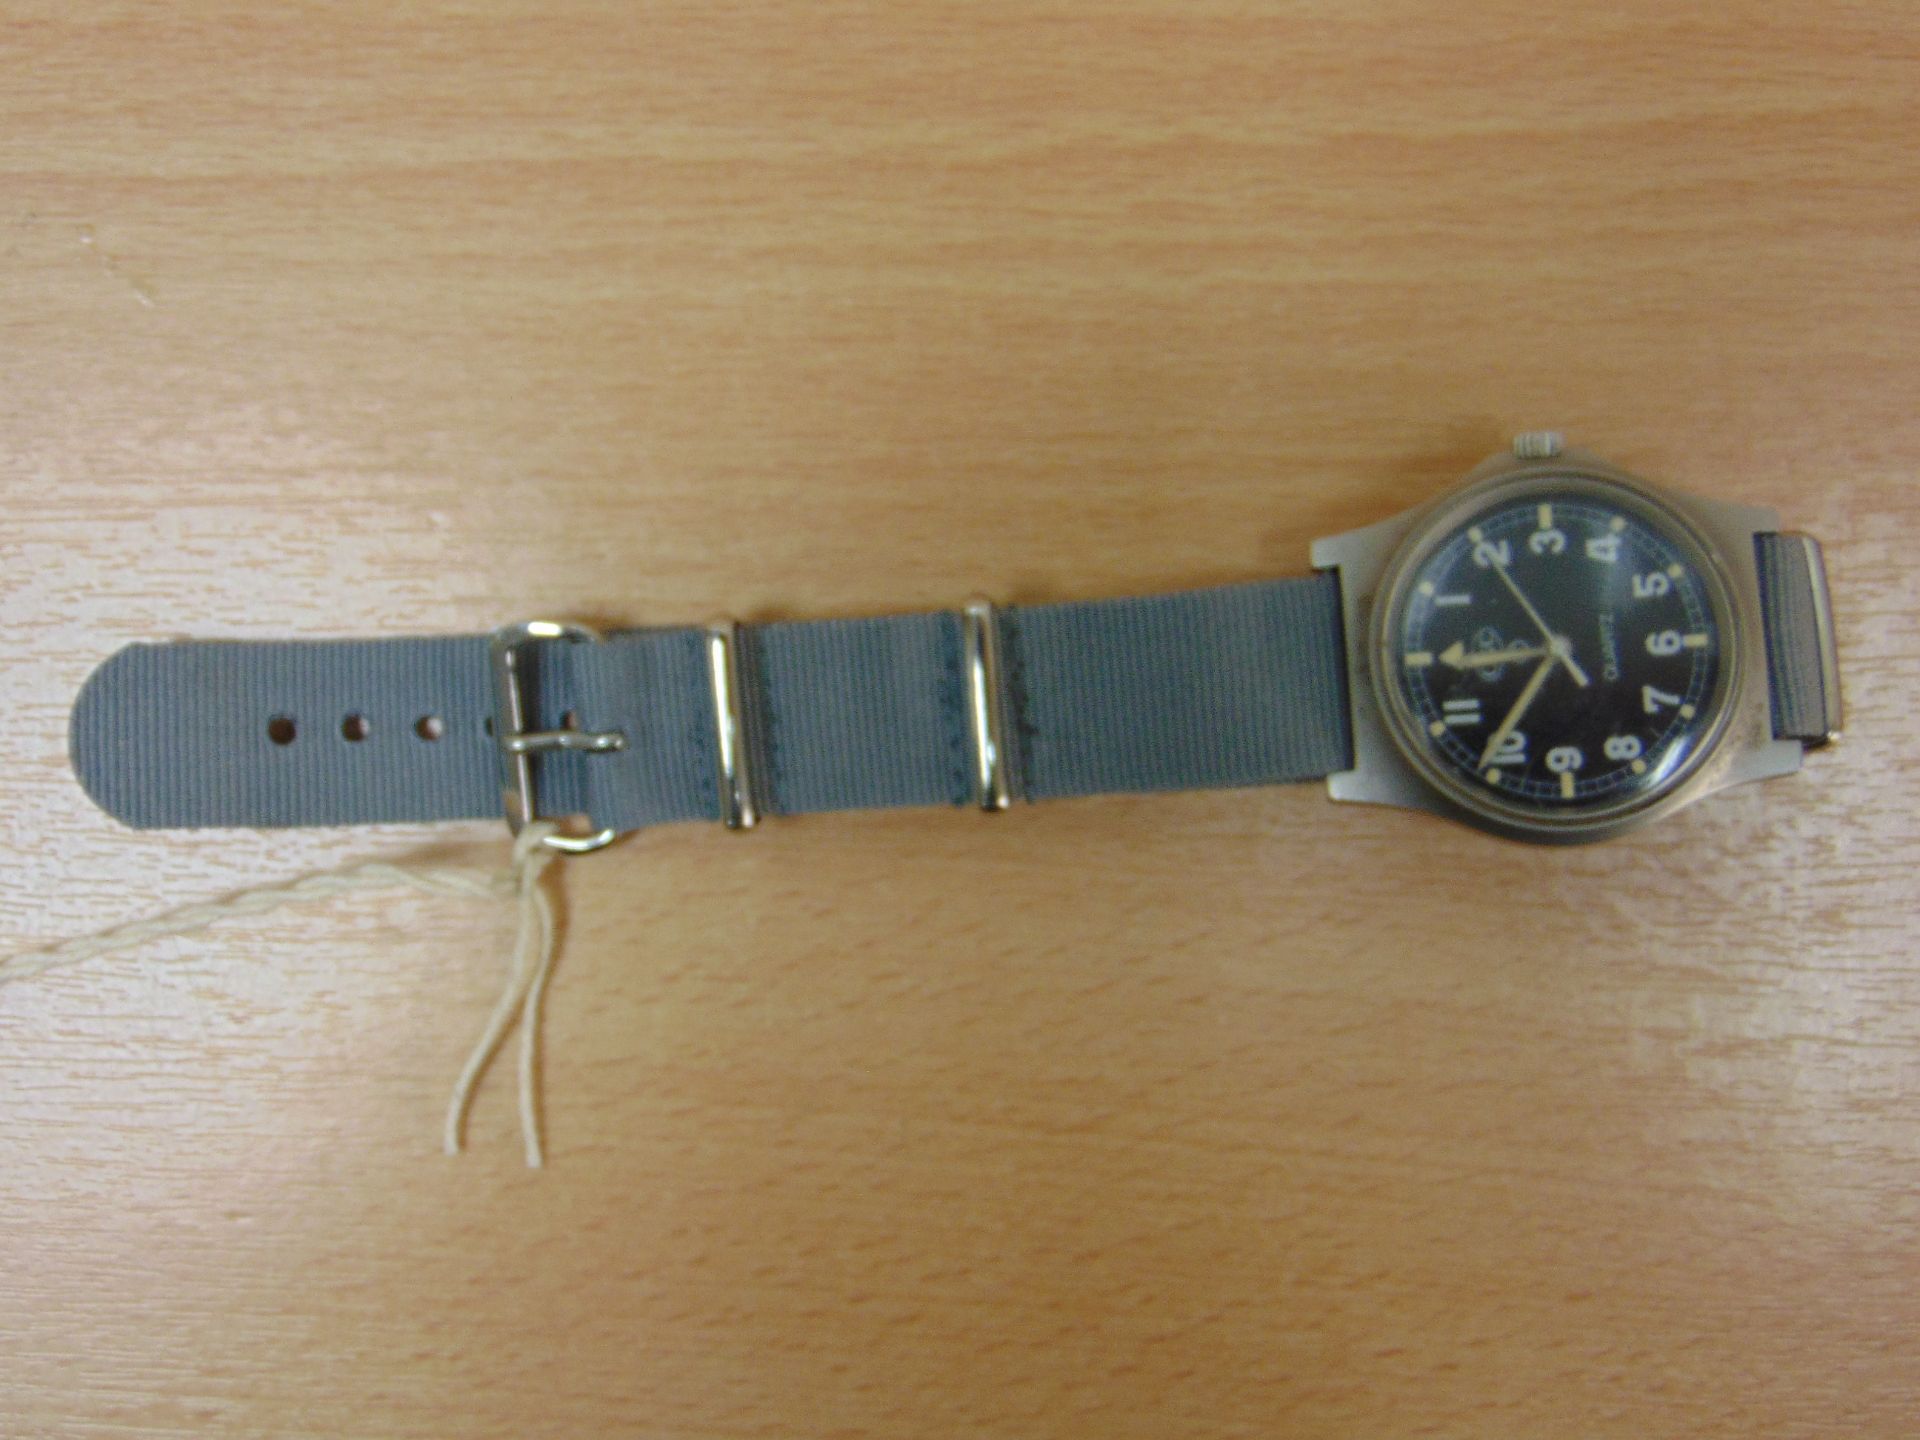 CWC W10 FAT BOY SERVICE WATCH DATED 1983 - Image 2 of 6